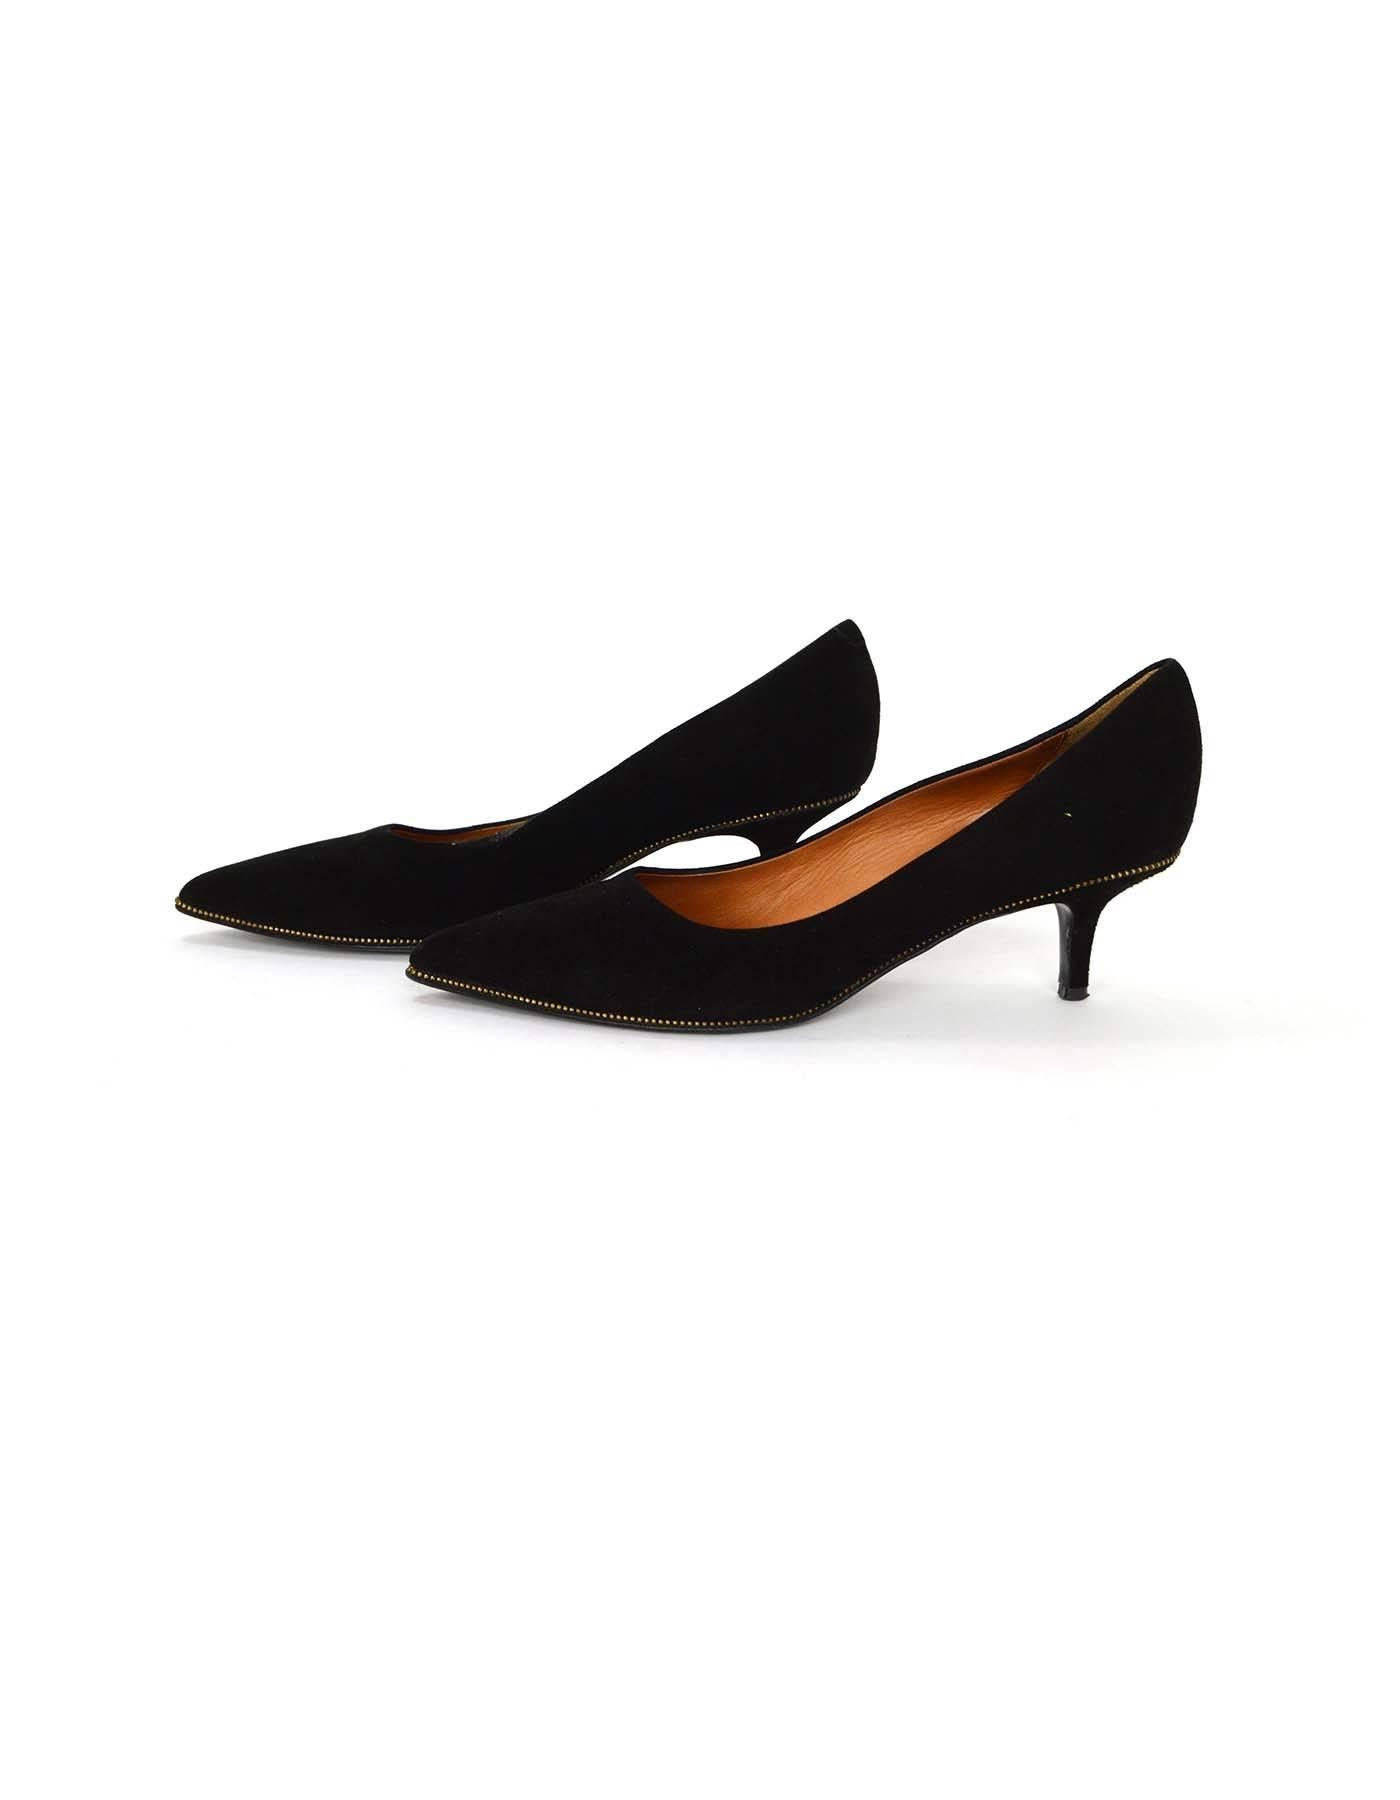 Givenchy Black Suede Kitten Heel Pumps 
Features zipper trim detailing around base of shoe
Made In: Italy
Color: Black 
Materials: Suede
Closure/Opening: Slide on
Sole Stamp: Givenchy Made in Italy 38 1/2
Overall Condition: Excellent